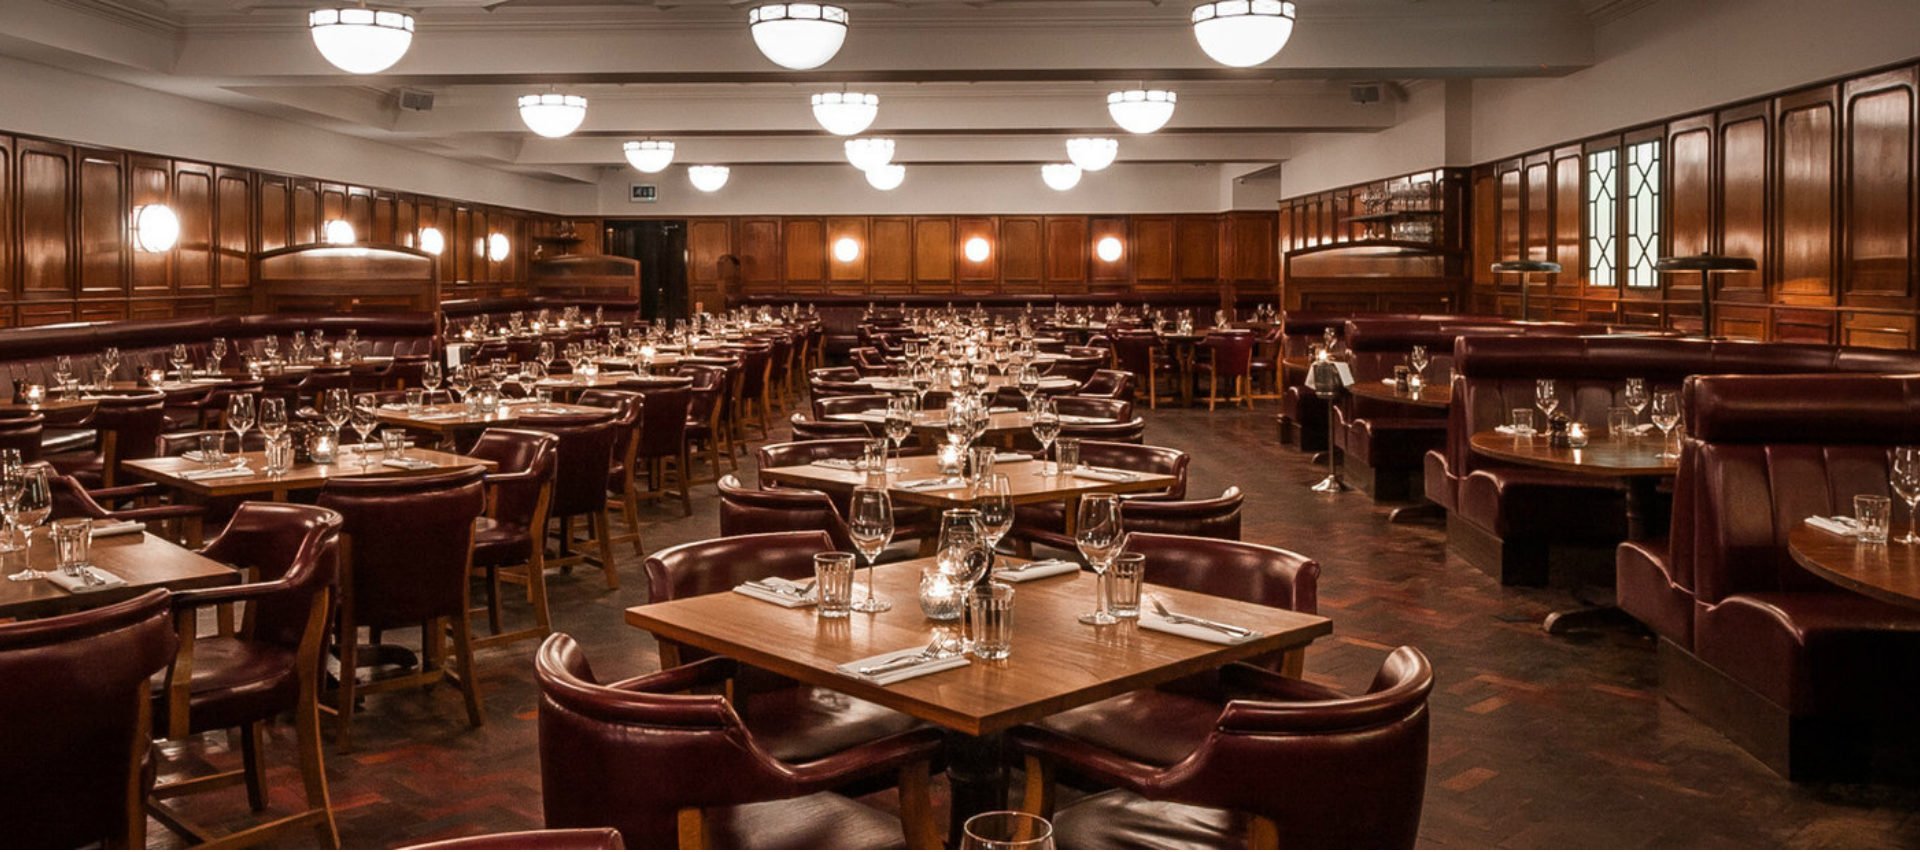 guildhall private dining room